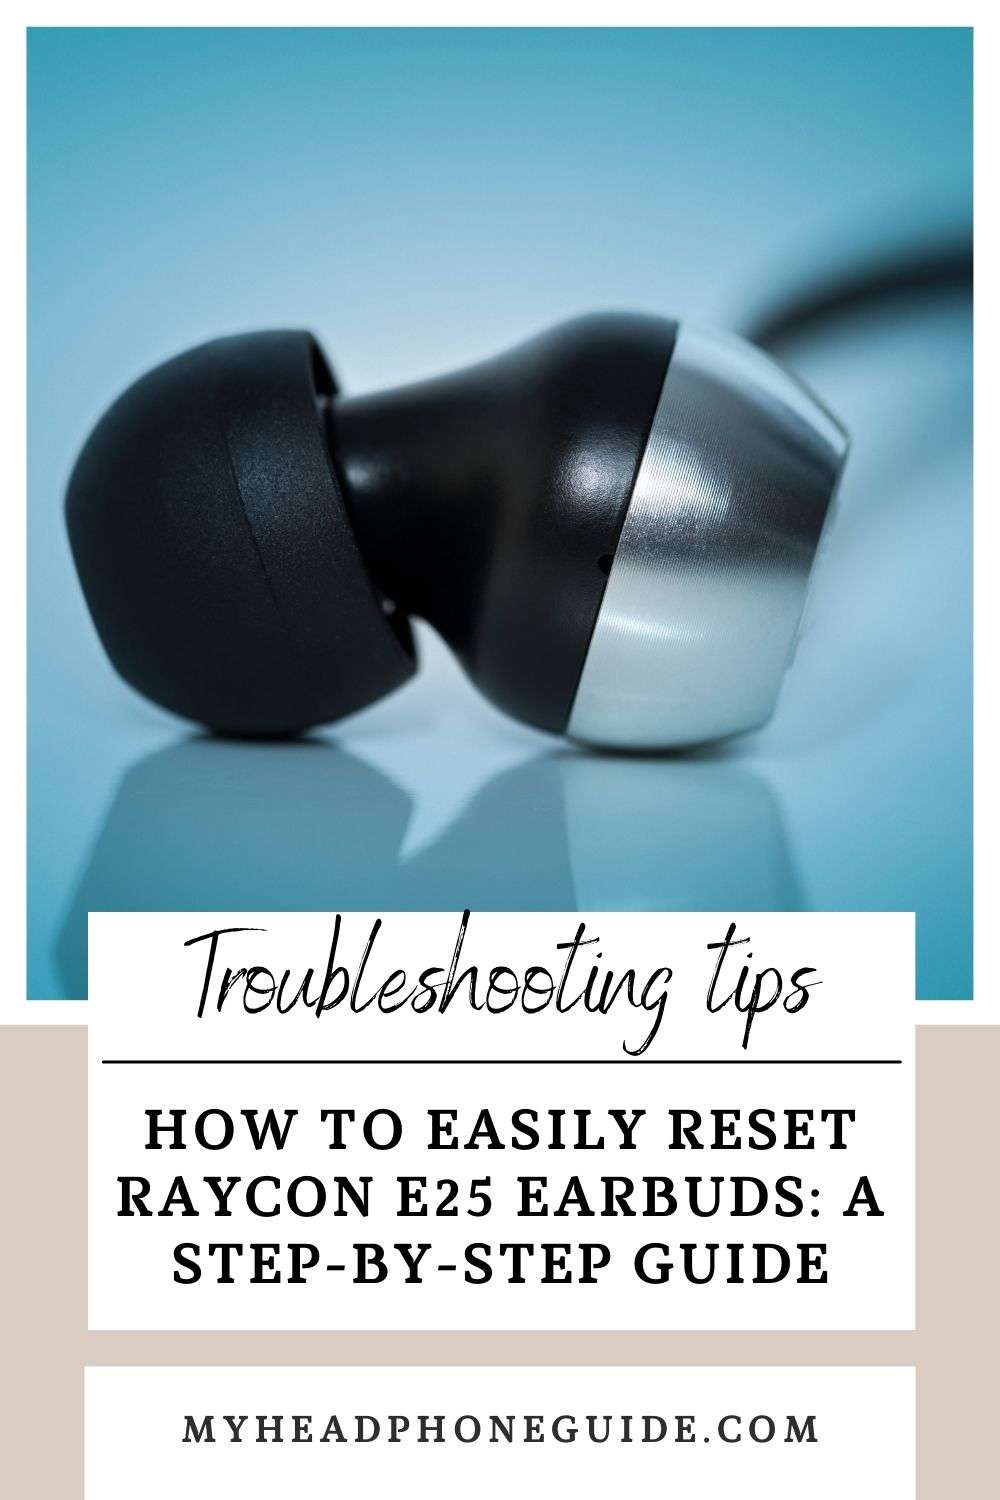 How to Easily Reset Raycon E25 Earbuds